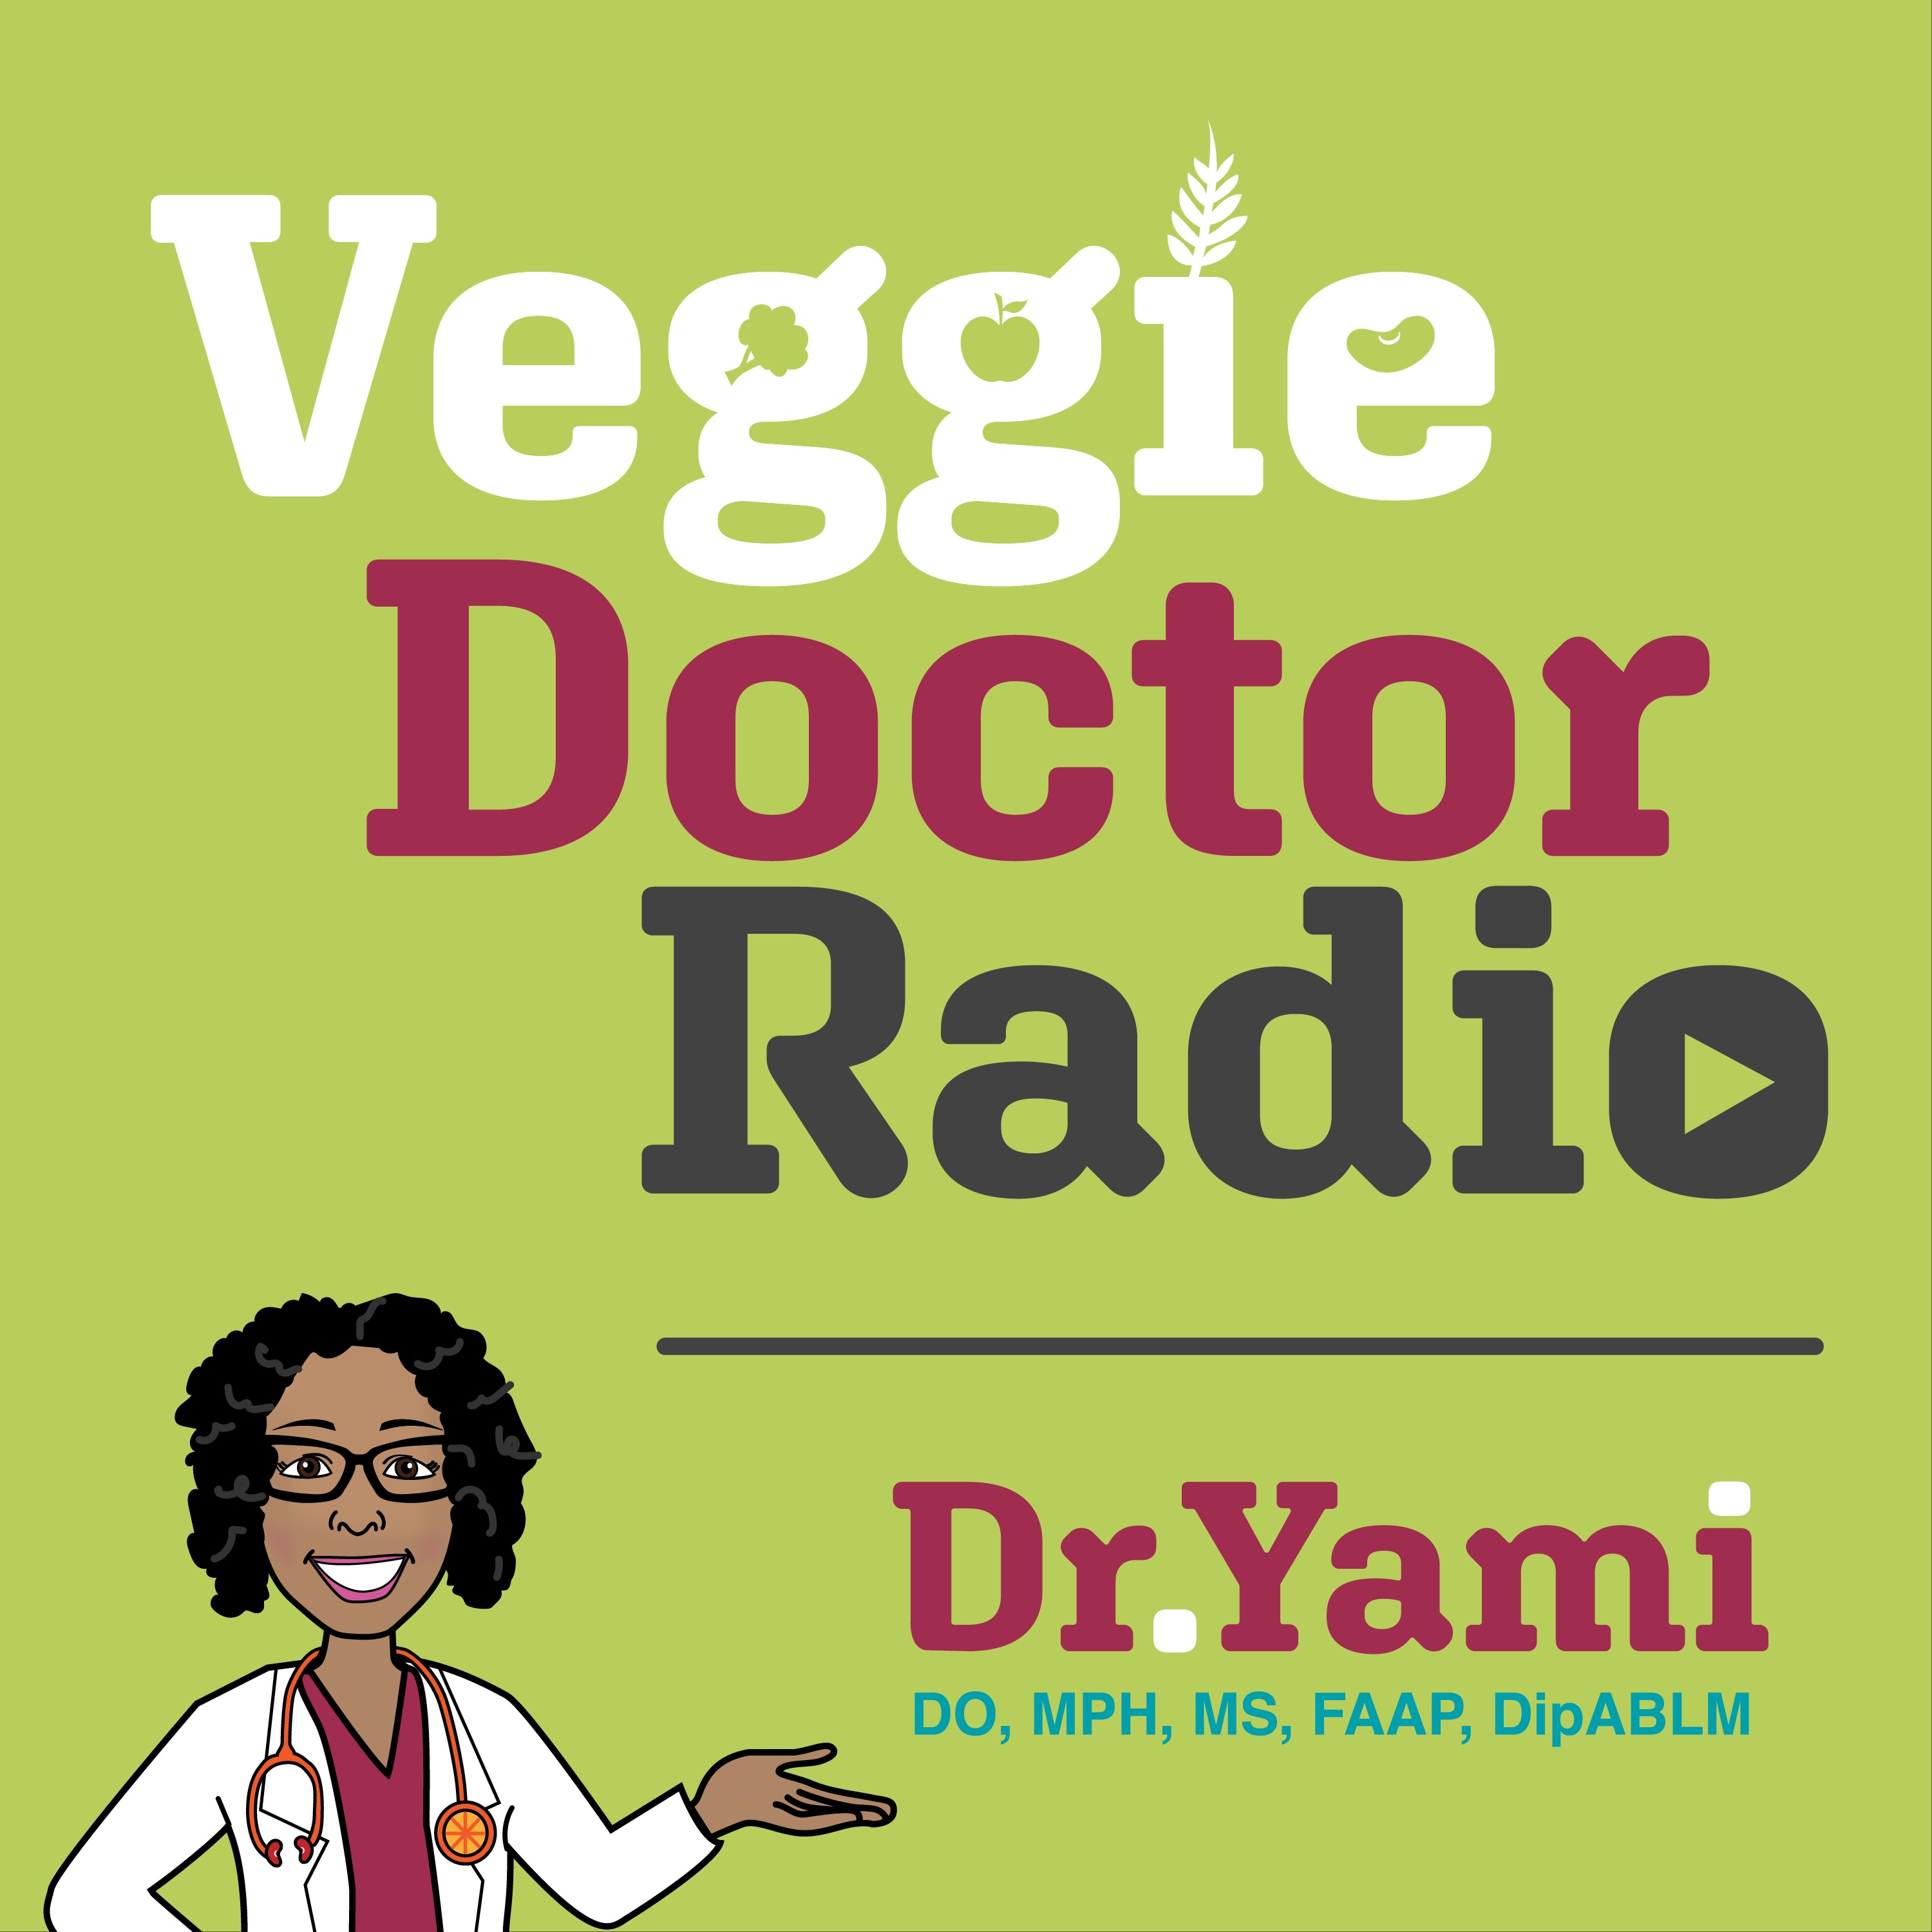 133B: Creating a Vegucated family with Documentary Film Creator Marisa Miller Wolfson (Veggie Doctor Radio)